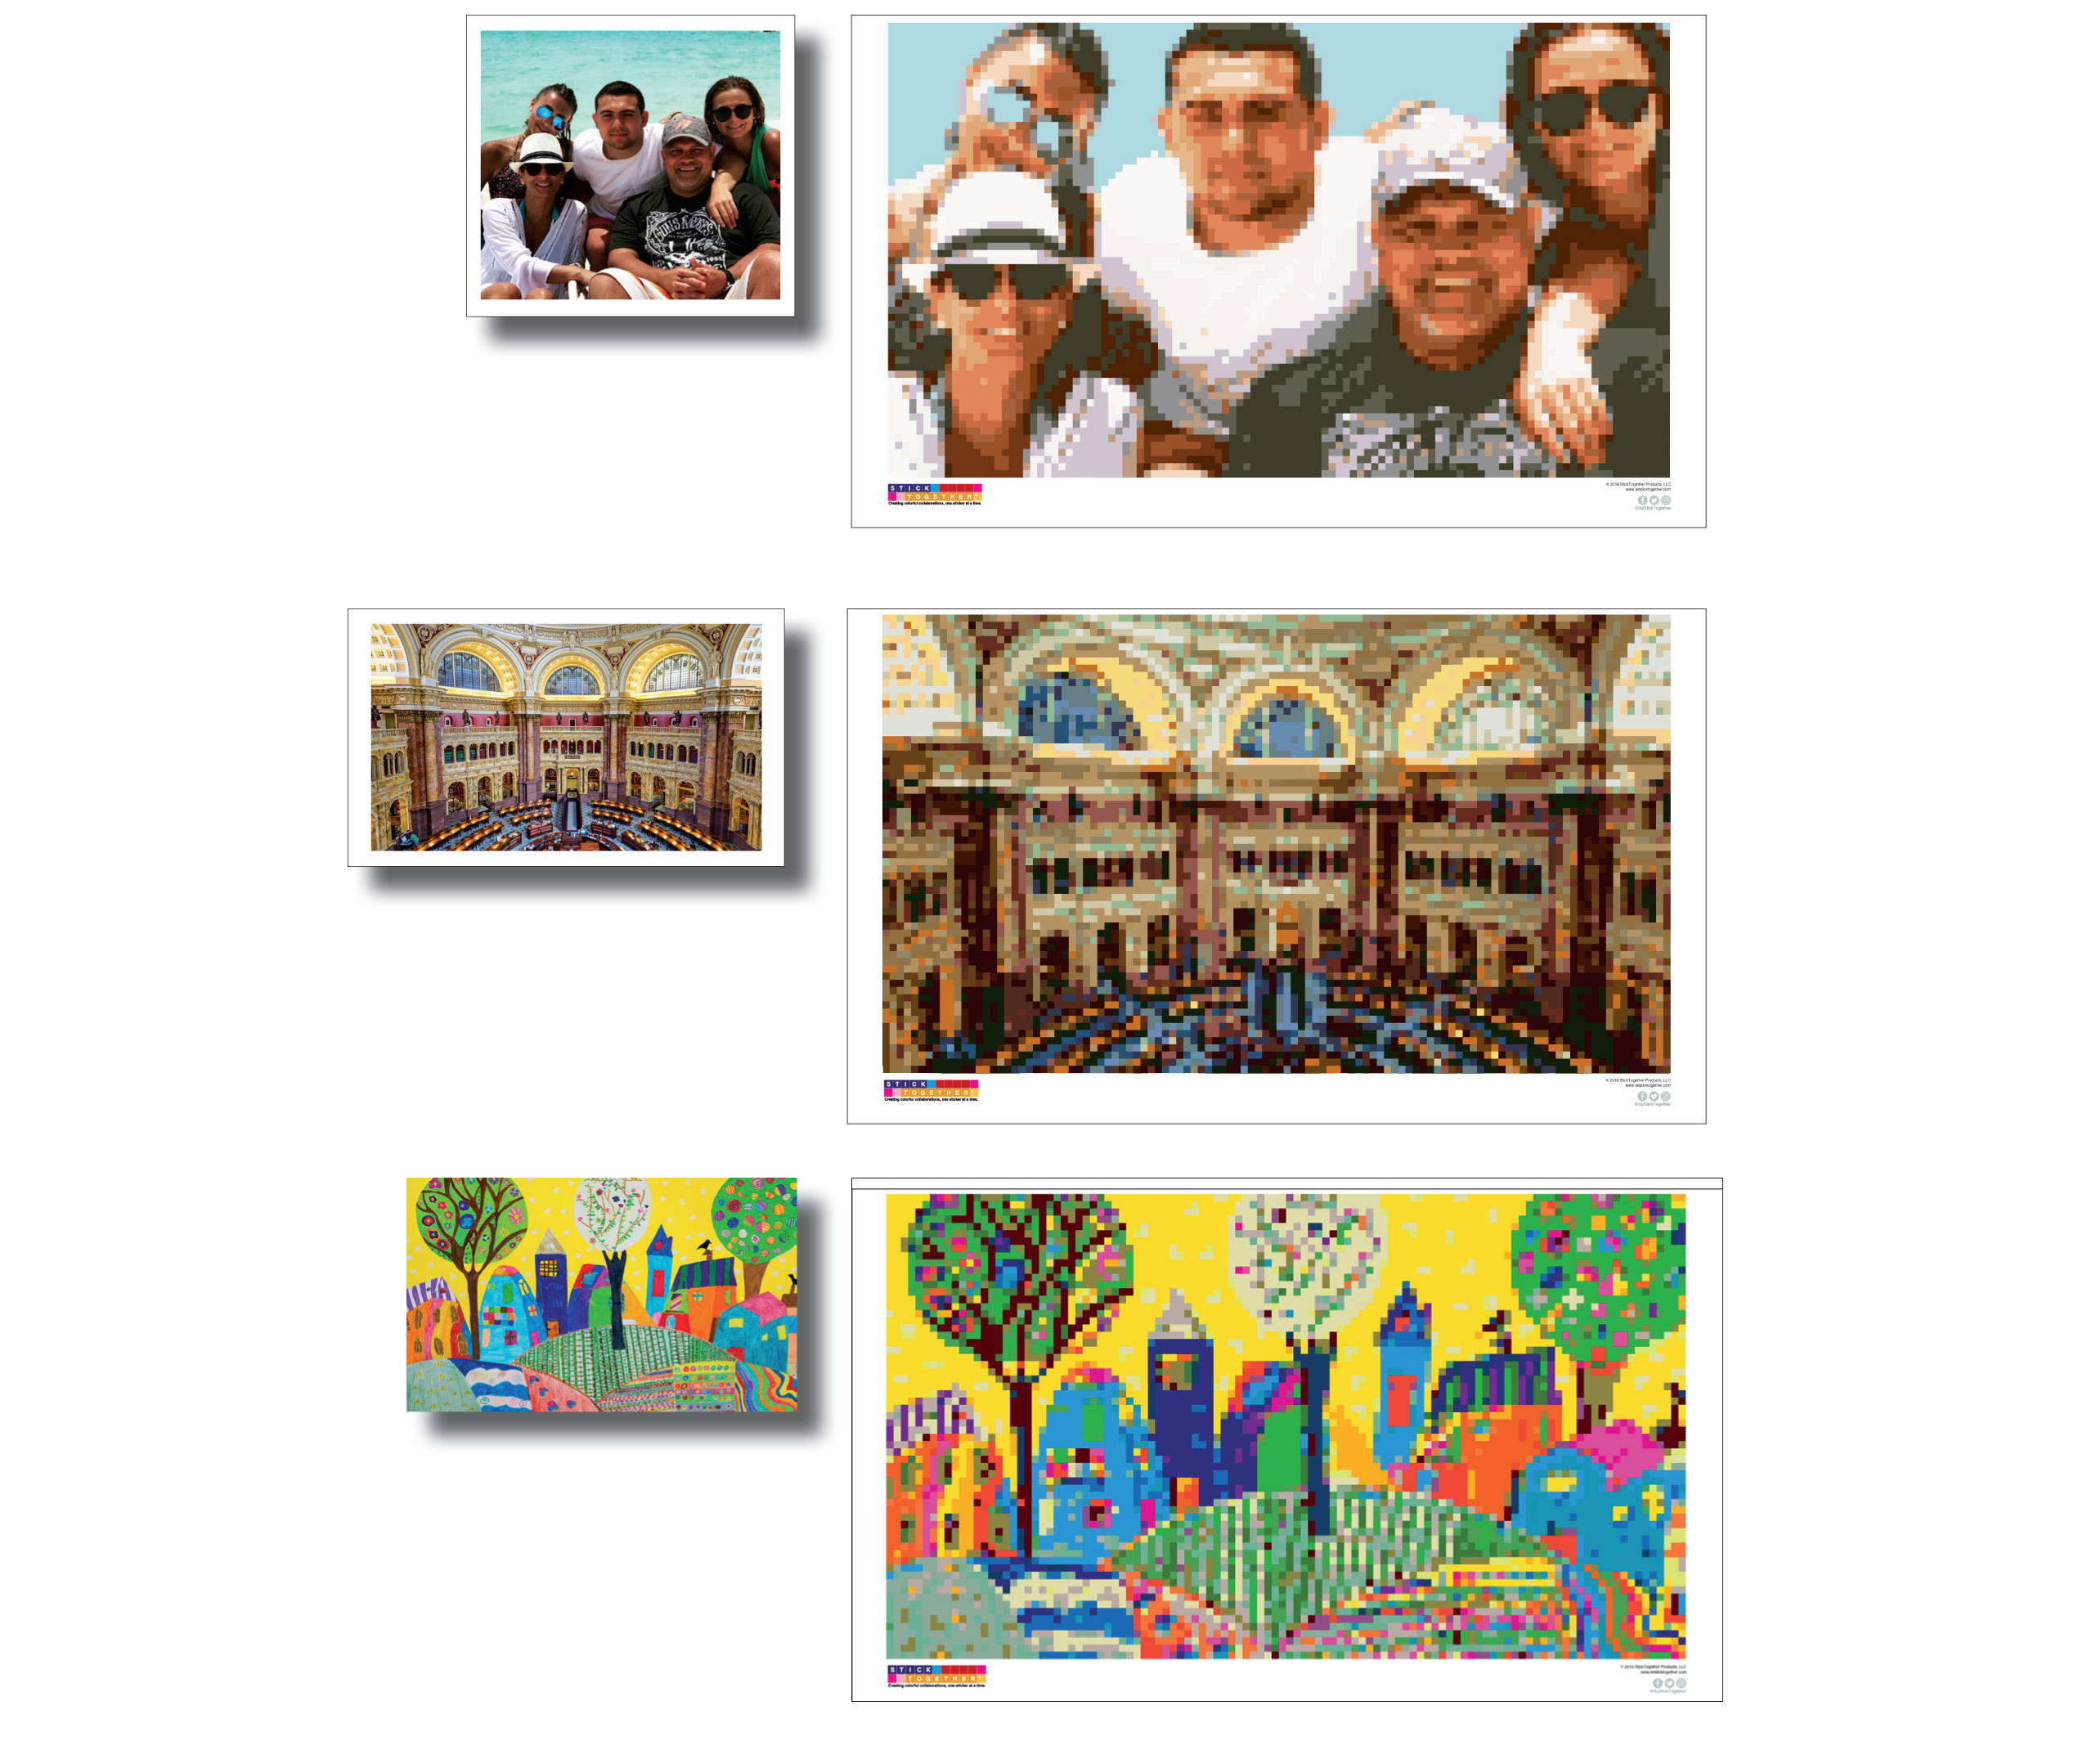 Demco - Enter to win one of four StickTogether mosaic sticker puzzle posters!  Contest ends 5/31/20. Enter Now: bit.ly/2VT4r3R